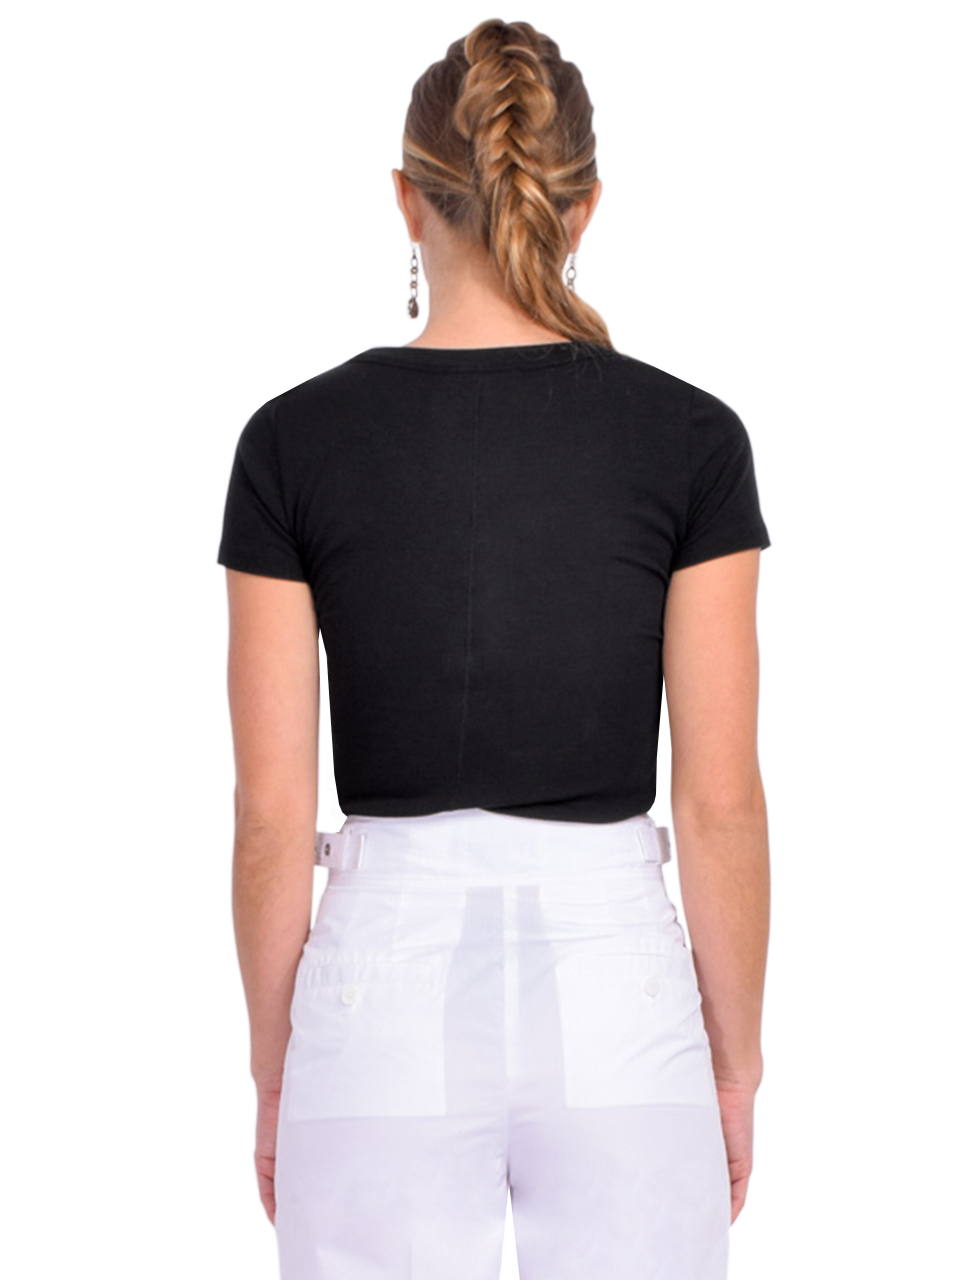 FRAME Rib Baby Tee in Black Back View 